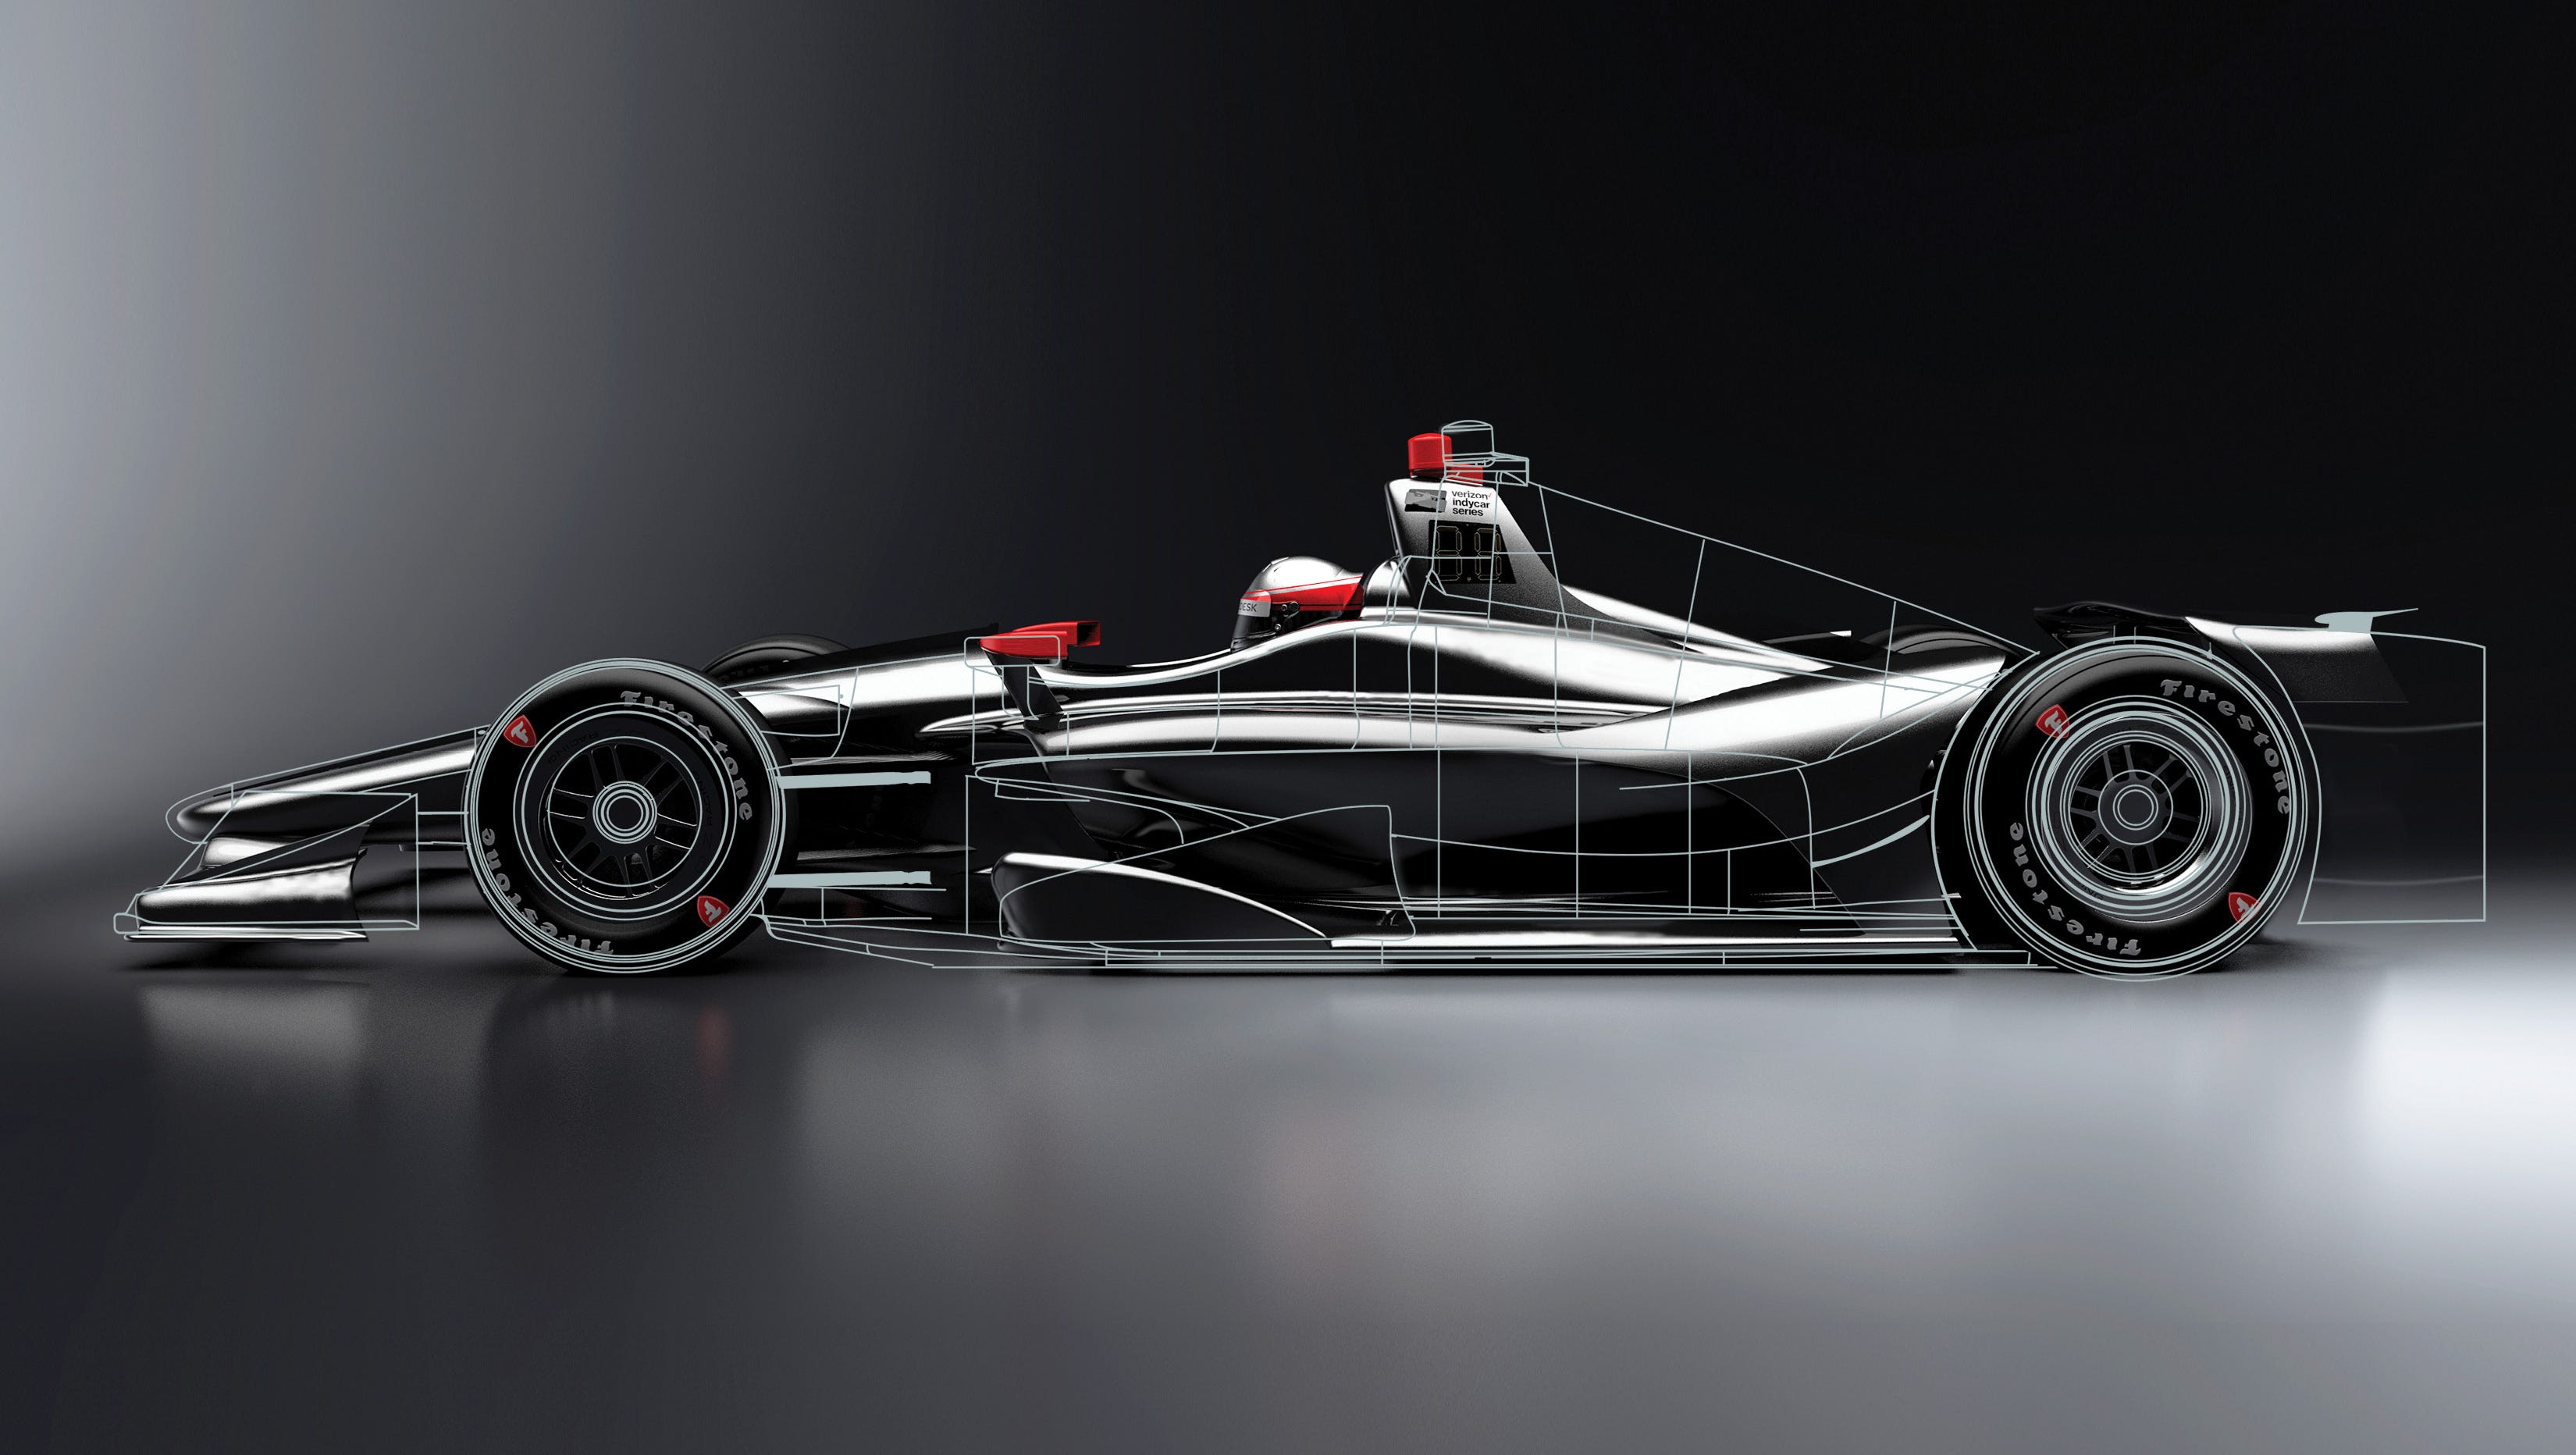 Indycar Reveals New Images In Next Evolution Of Race Car